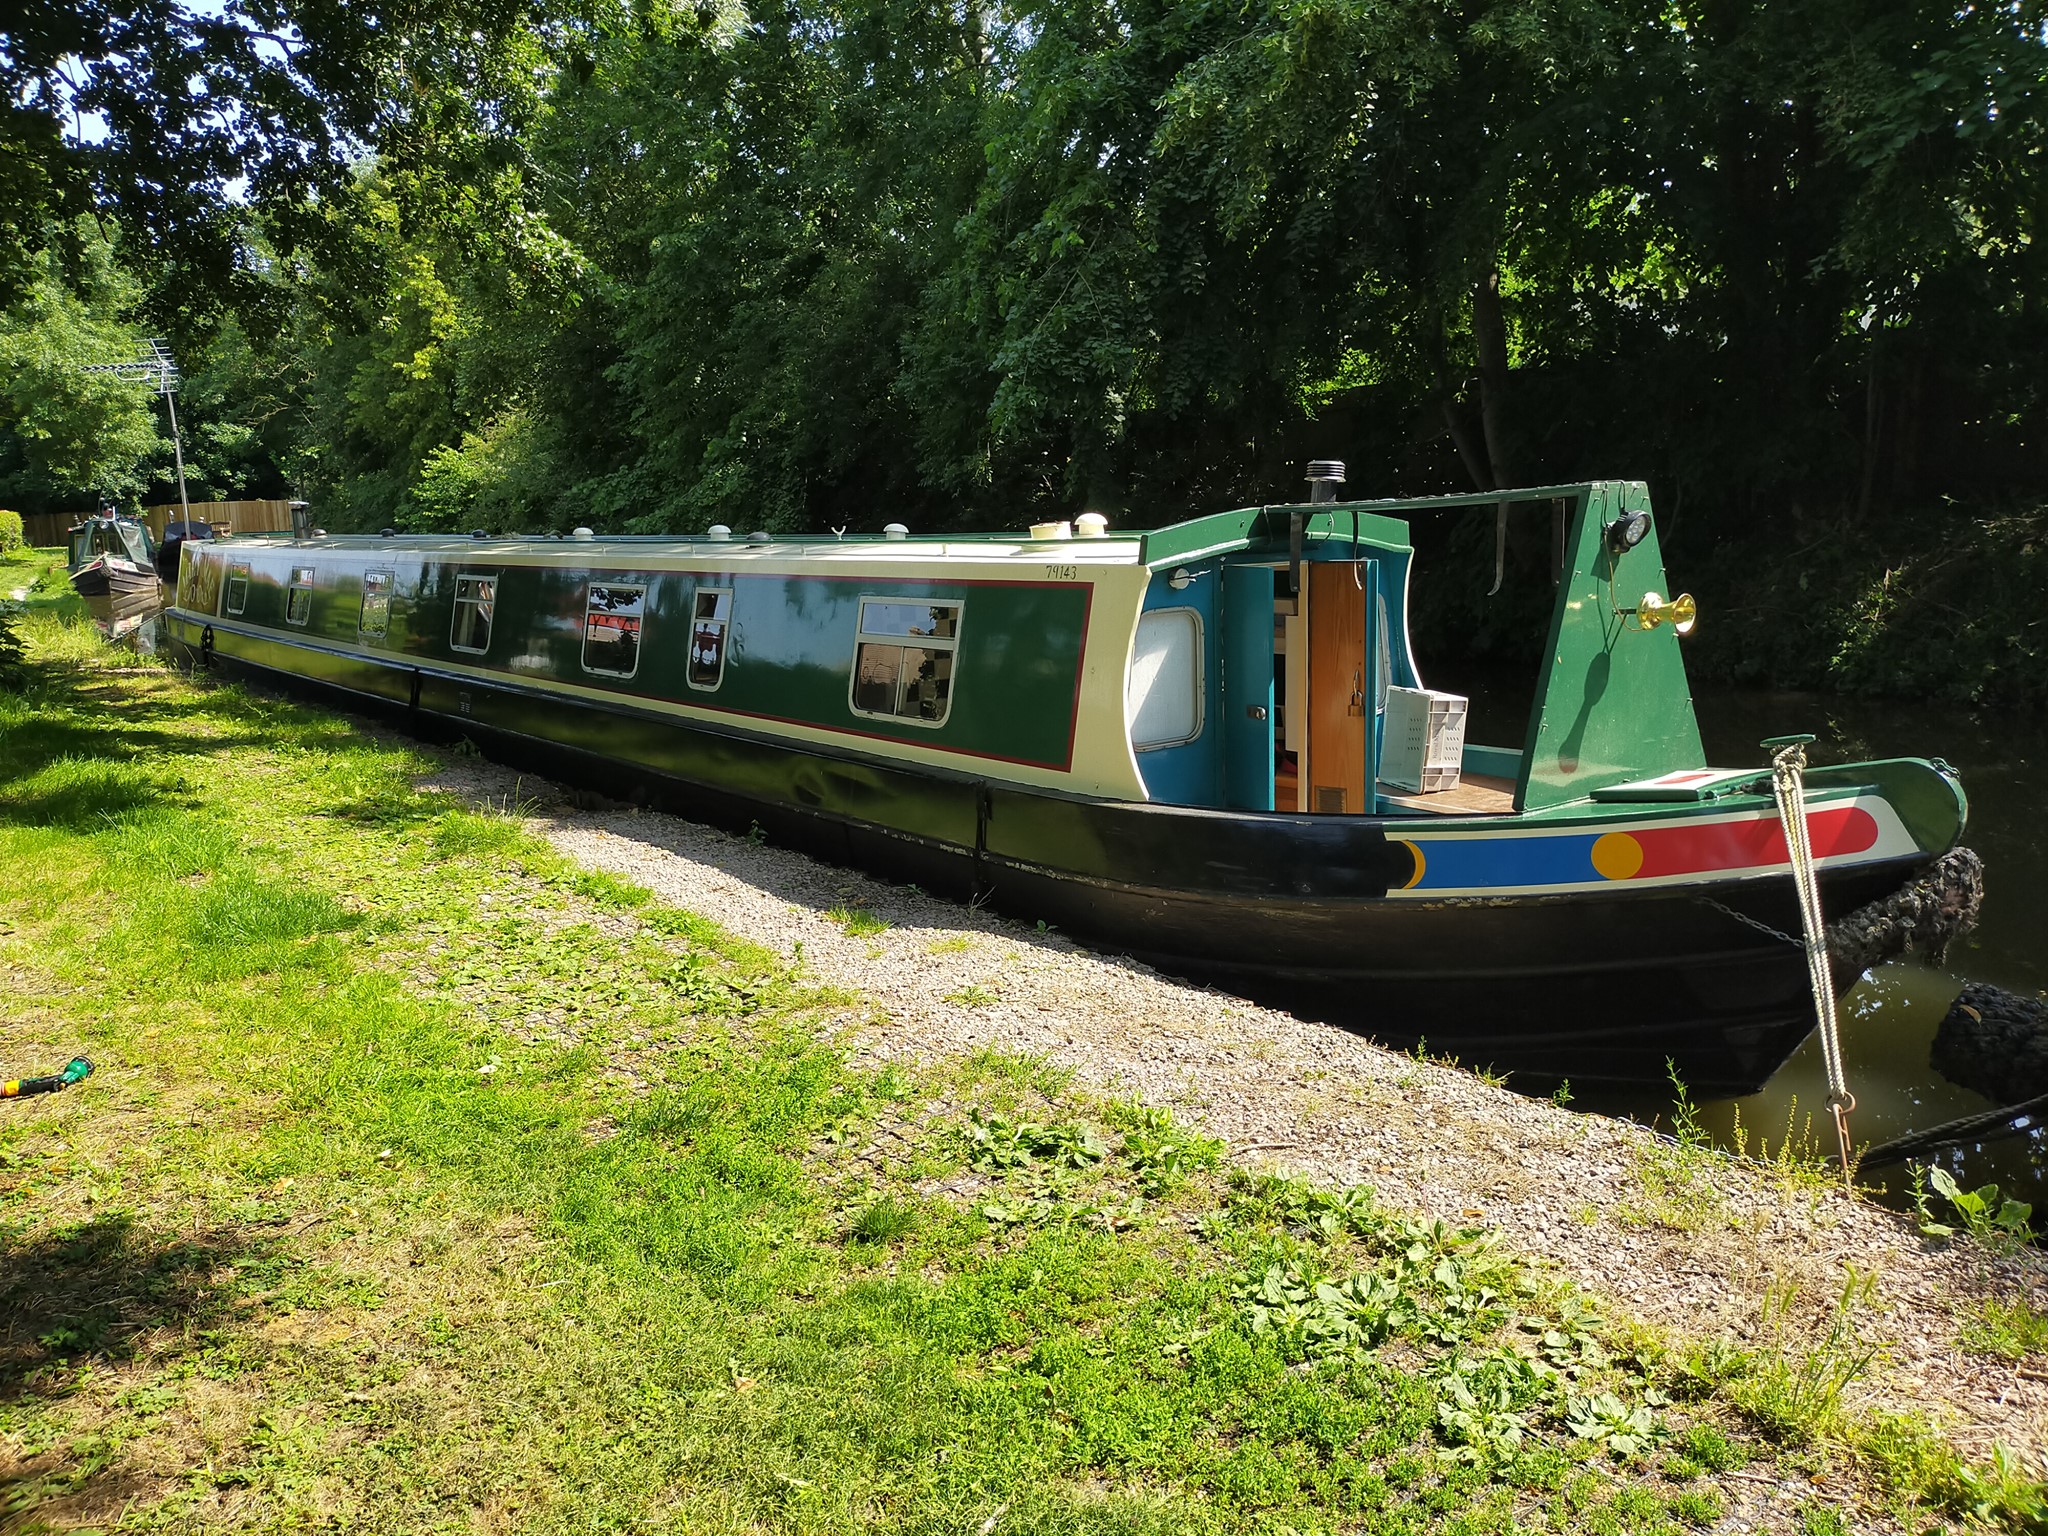 tour boats for sale uk